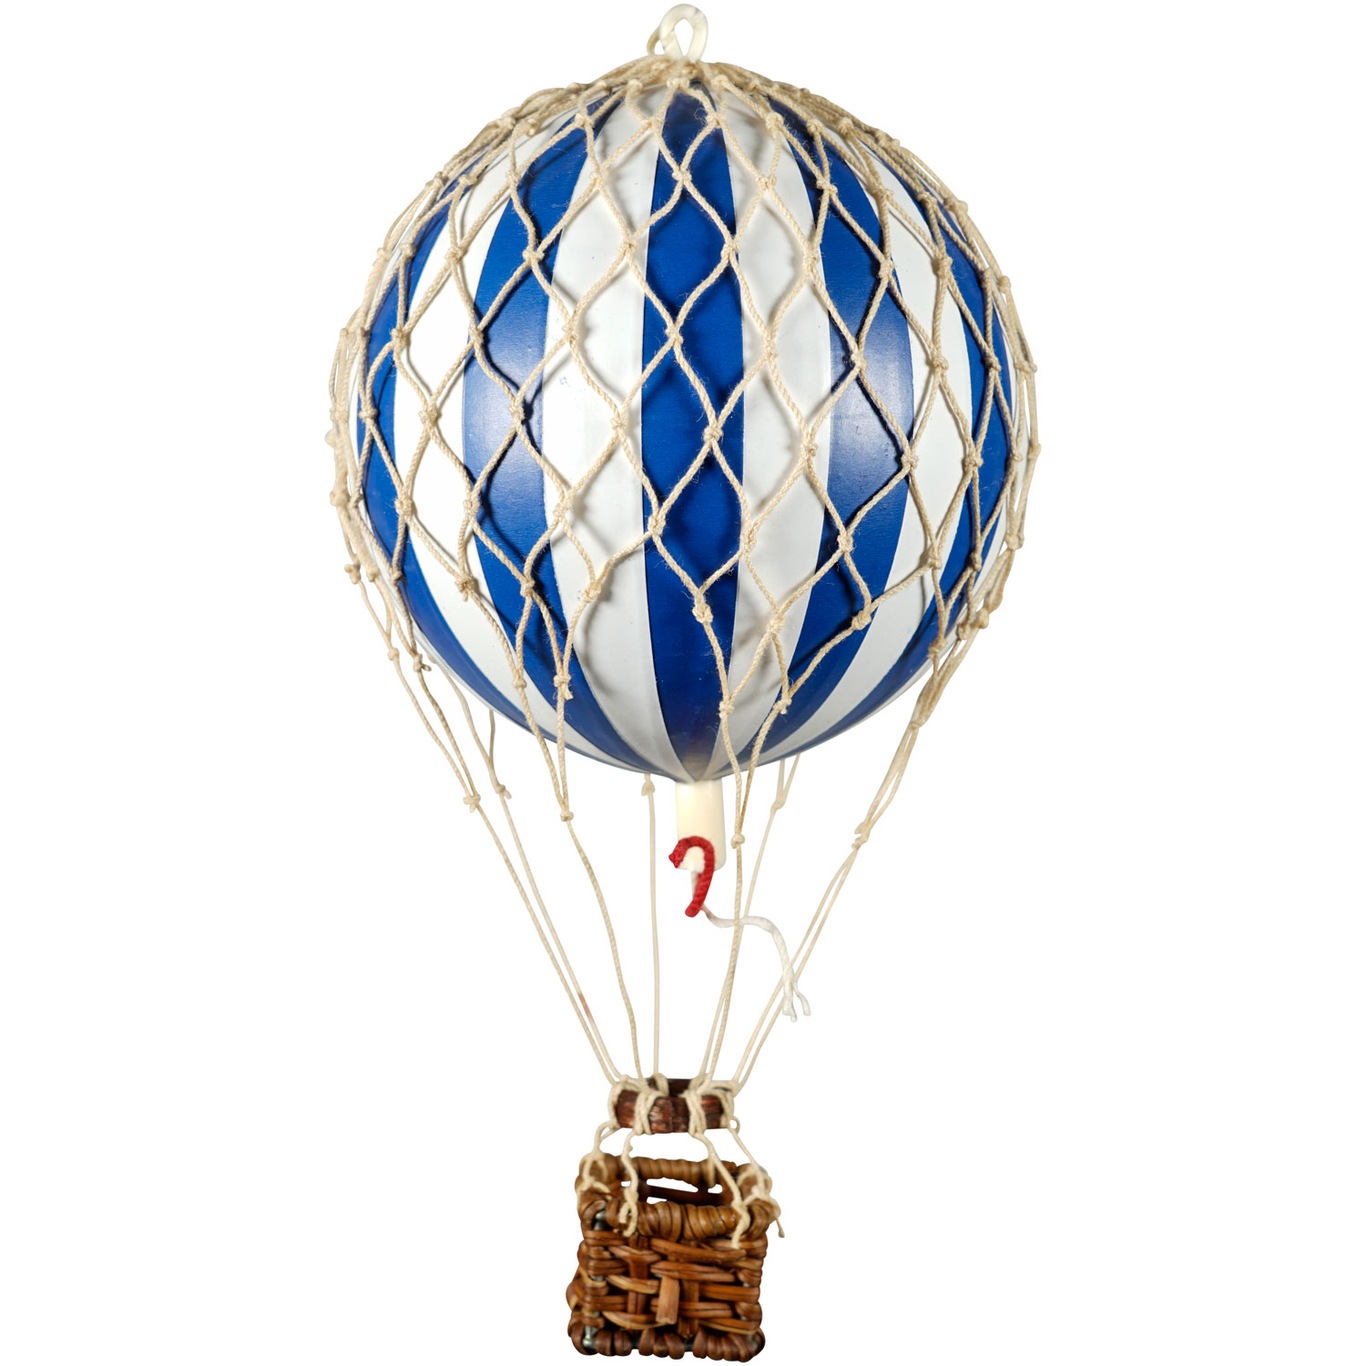 Floating The Skies Luchtballon 13x8.5 cm, Blauw / Wit